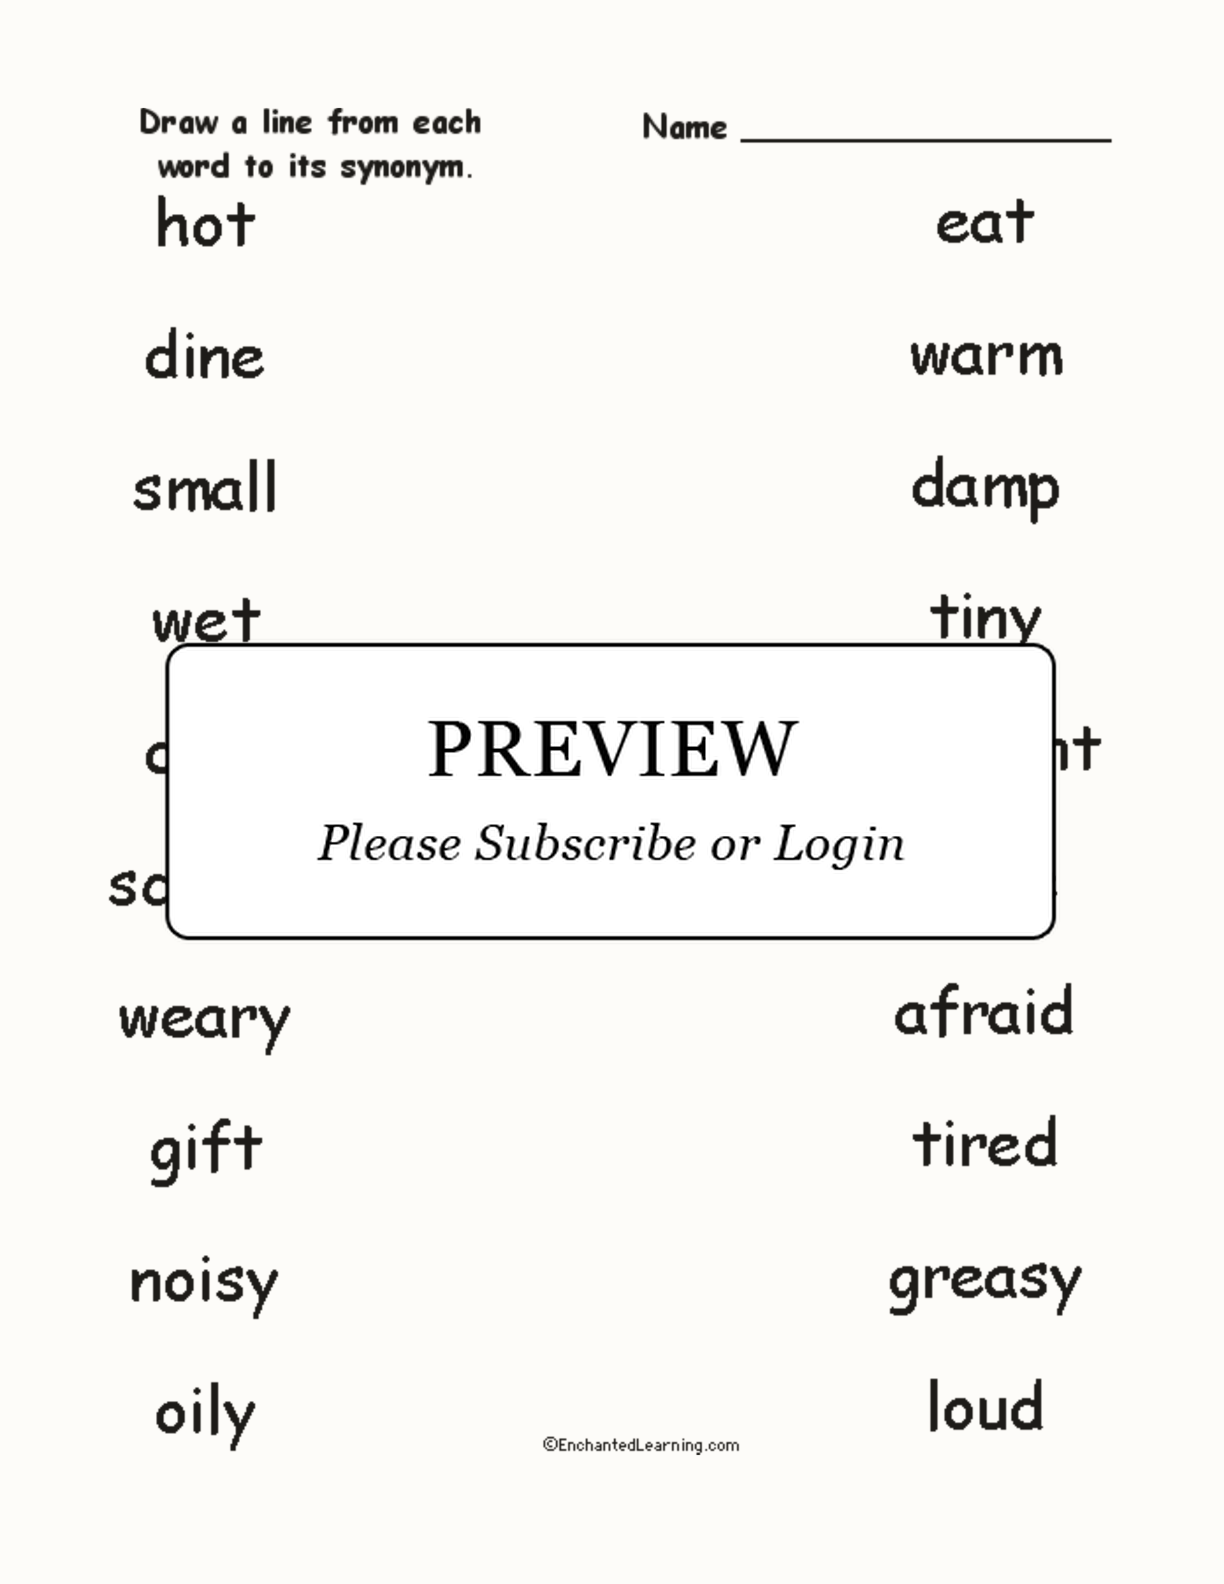 Present - Definition, Meaning & Synonyms | Vocabulary.com